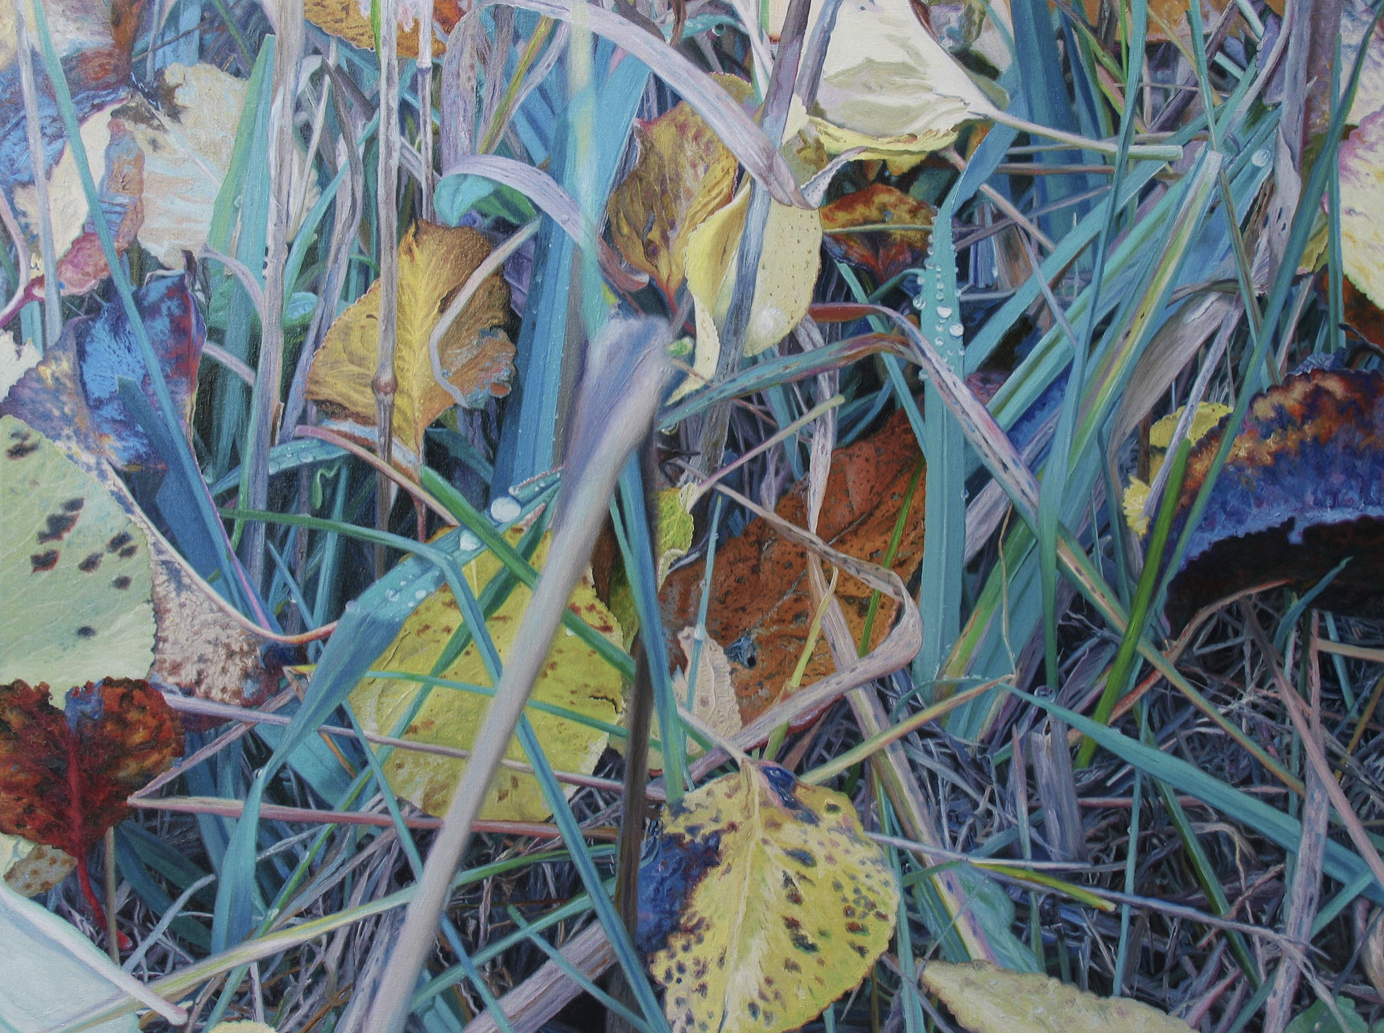 Fred Danzinger, Autumn Path, 2008, oil on canvas, 36 x 48 in